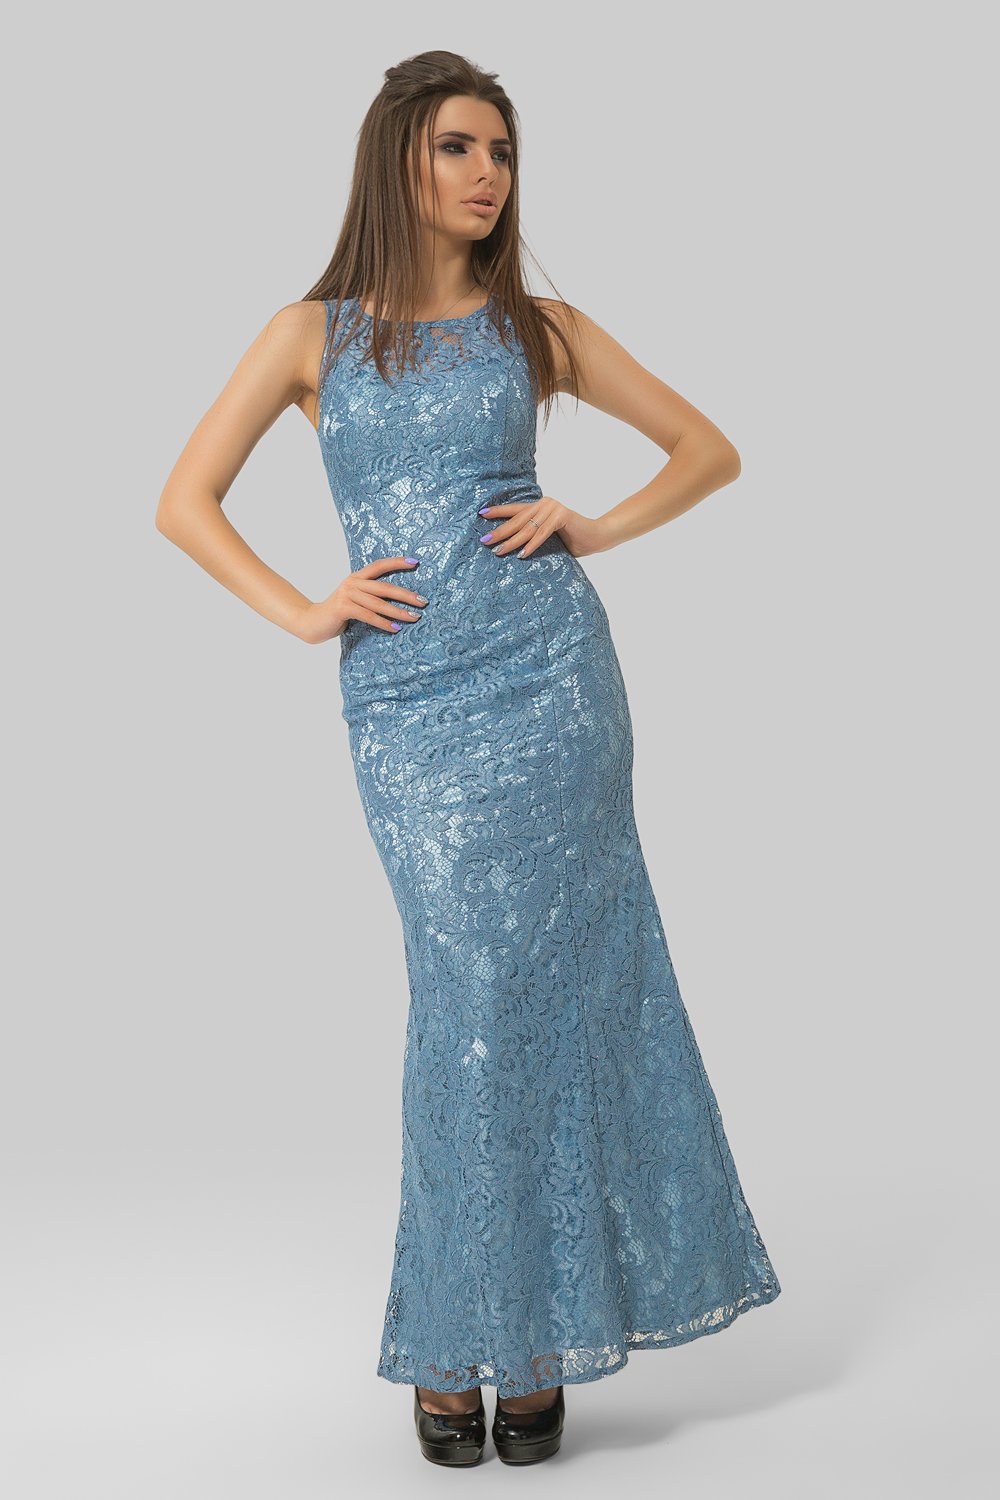 A floor-length evening dress in taupe and blue